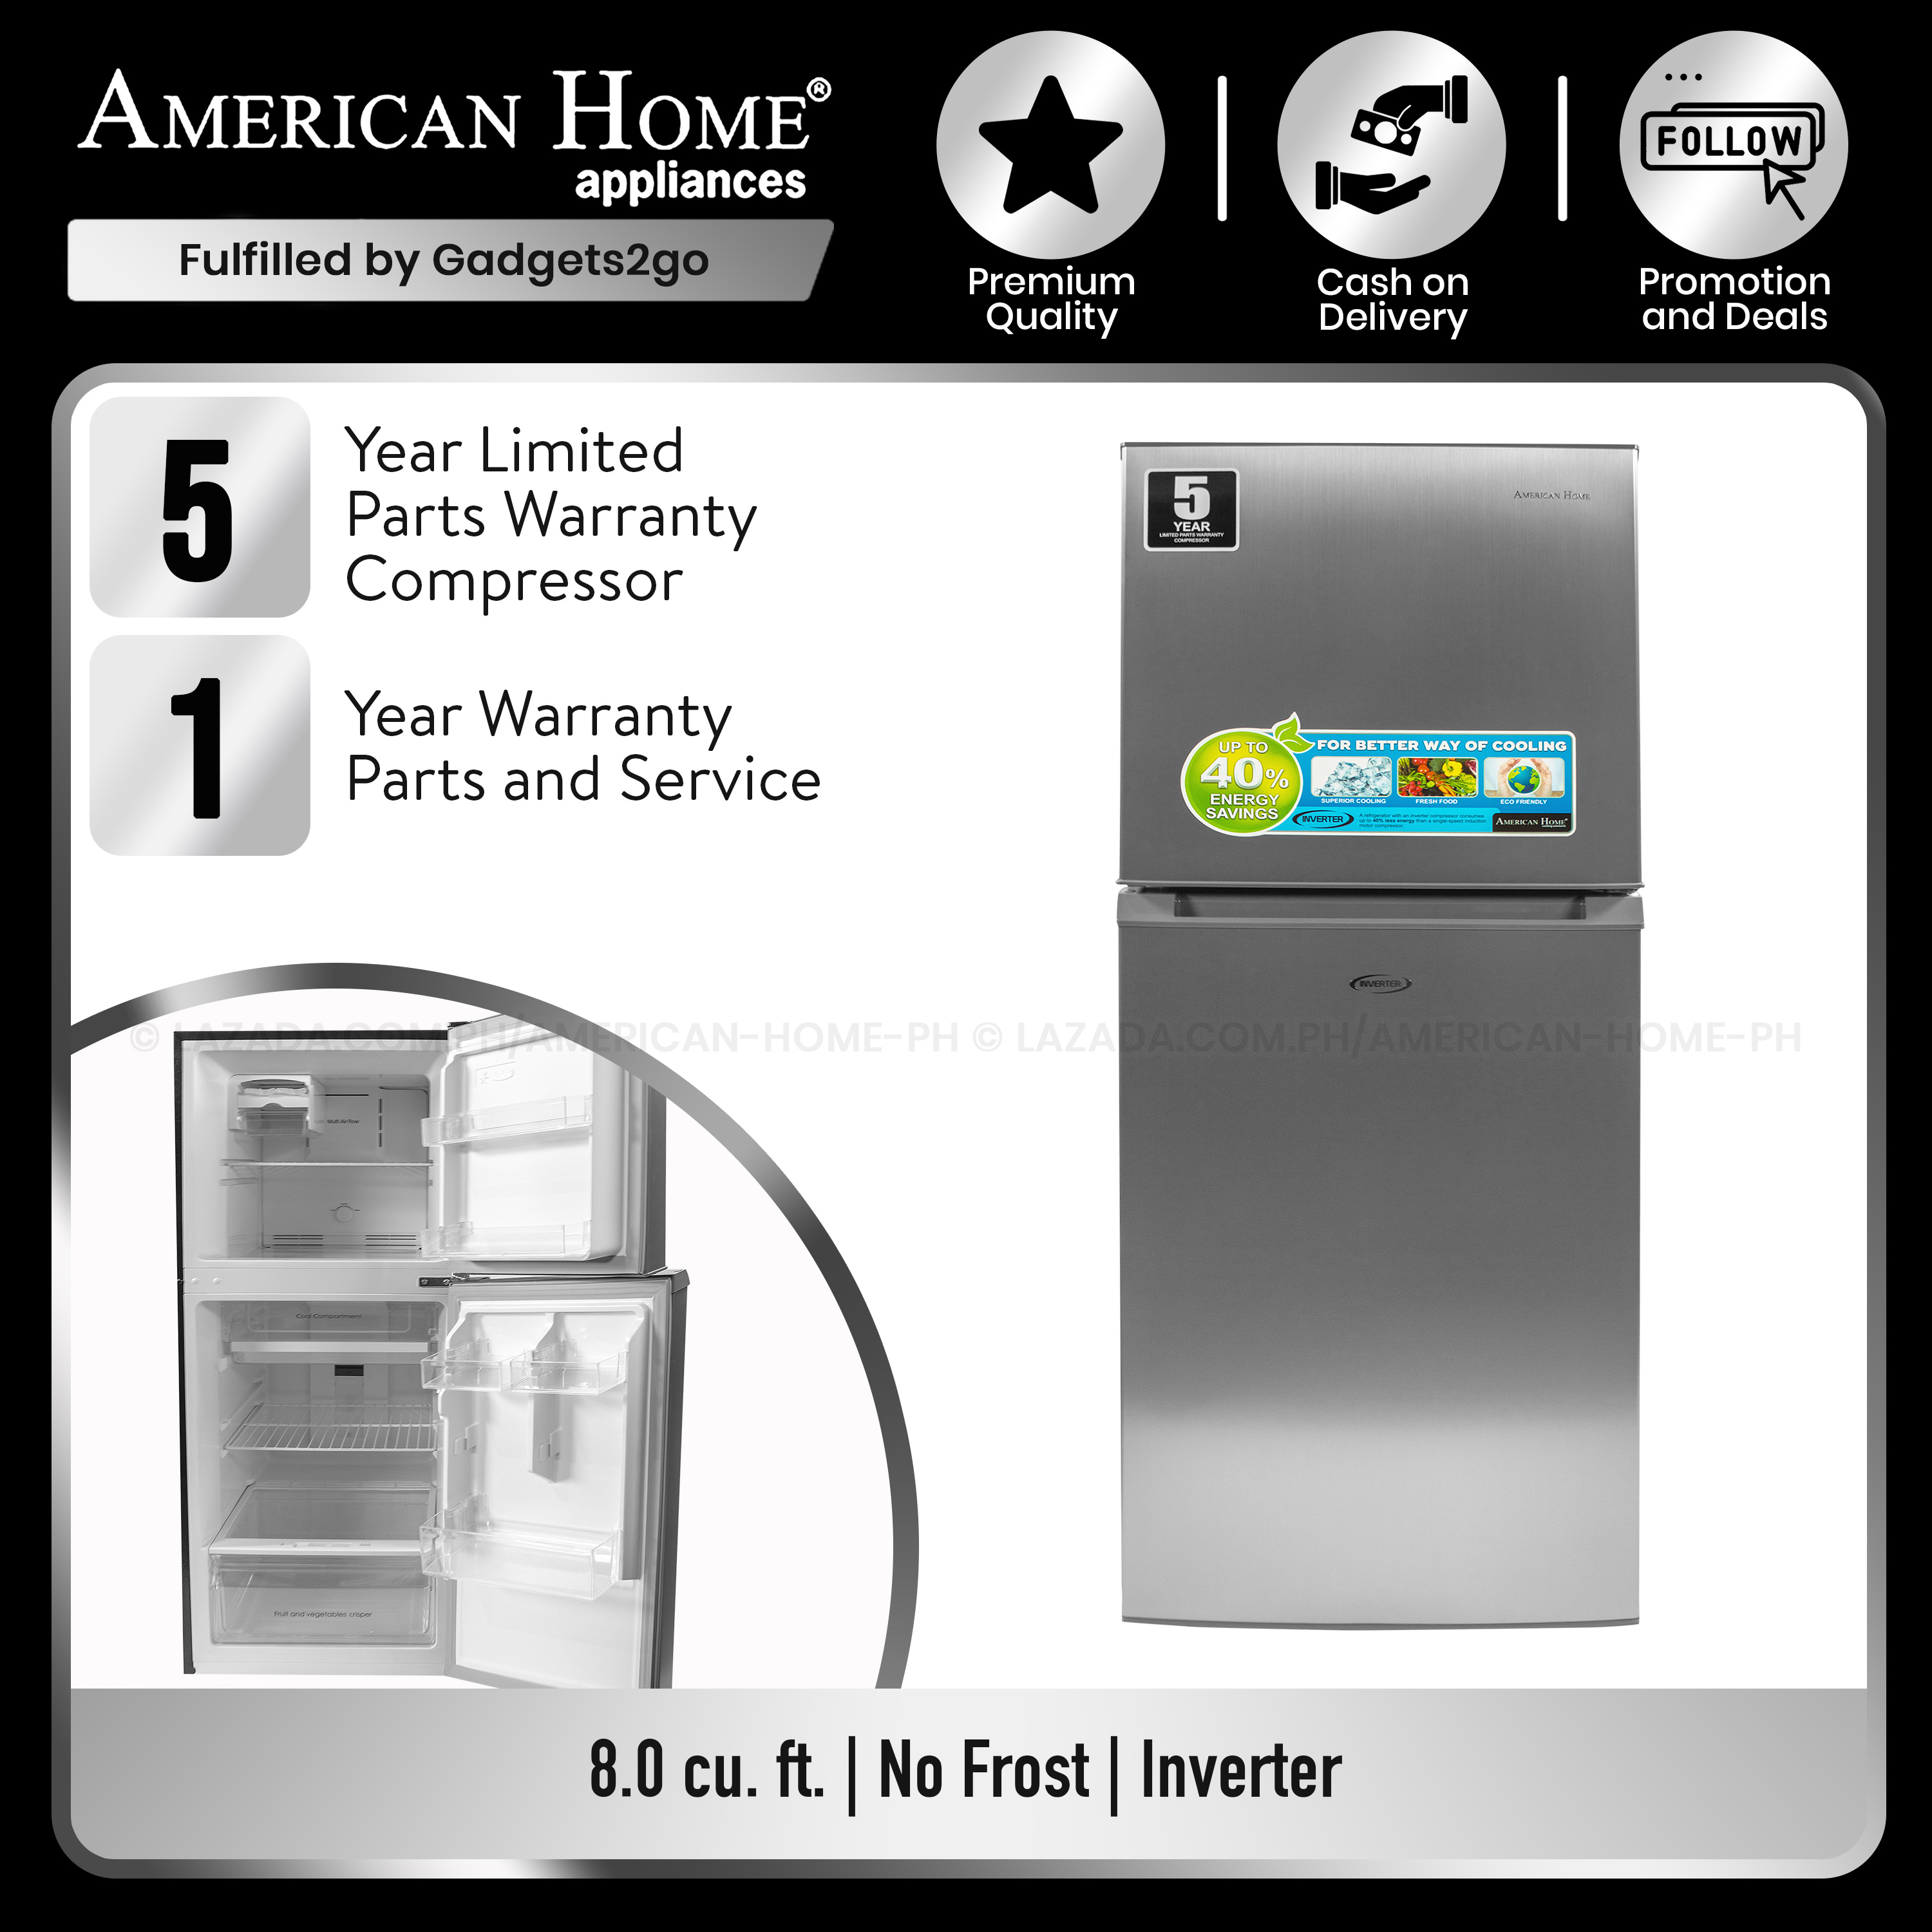 American Home 8.0 cu. ft. Inverter Refrigerator with No Frost